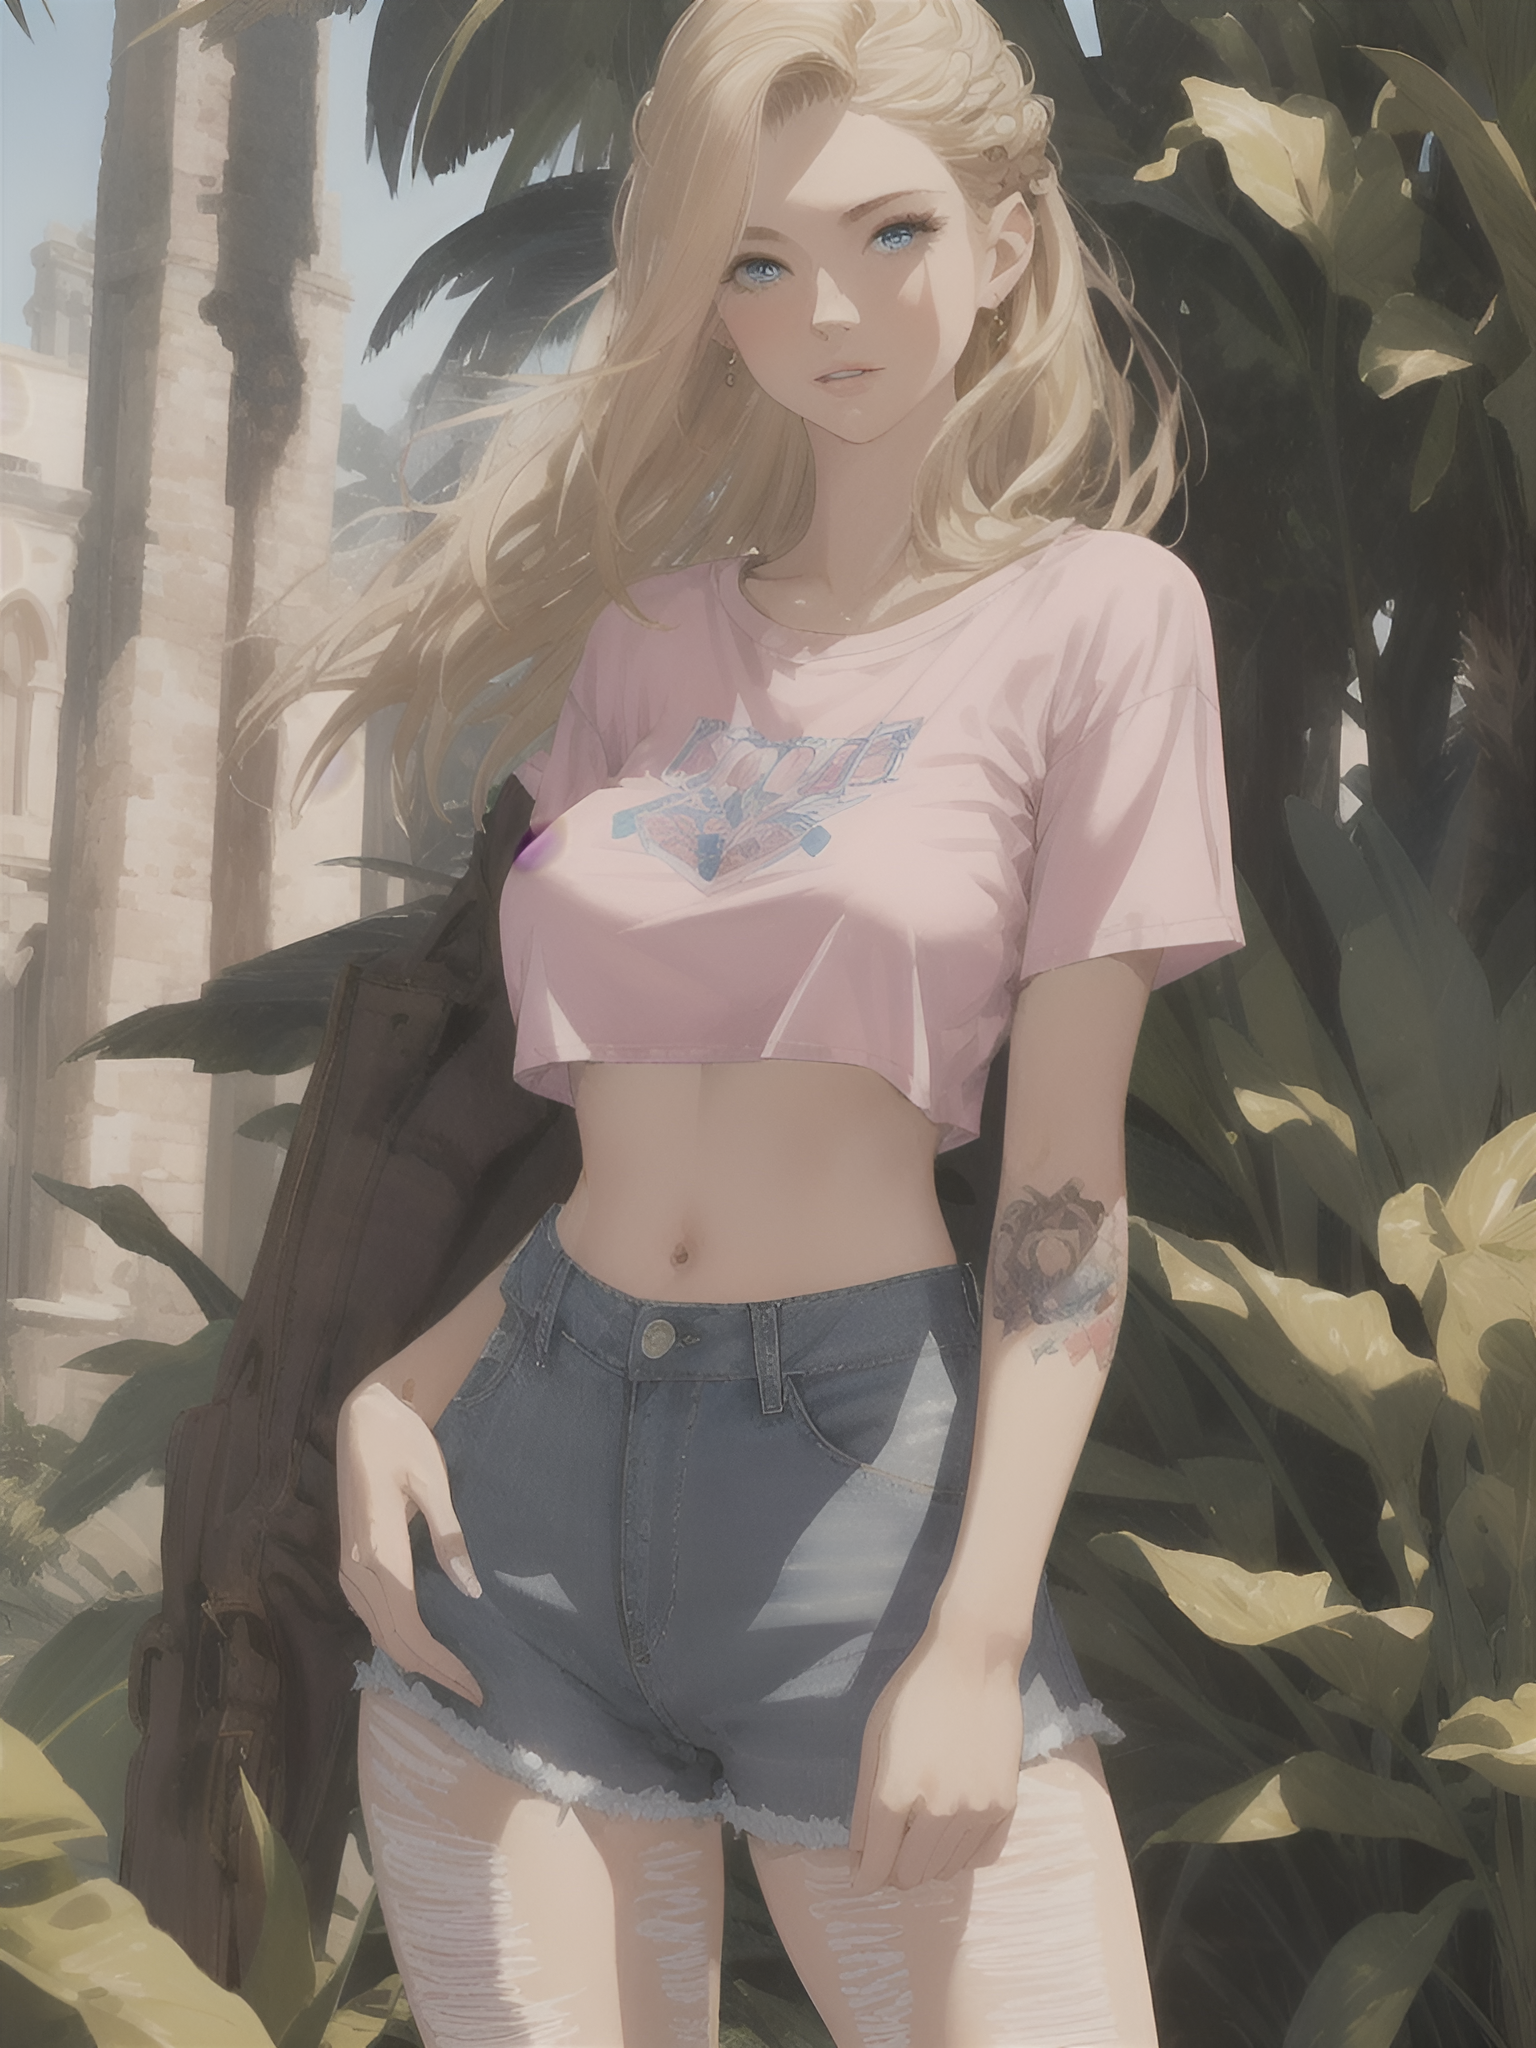 Anime 1536x2048 AI art anime girls blonde belly long hair looking at viewer blue eyes jean shorts bare midriff tattoo plants pink tops portrait display column leaves no bra natural boobs